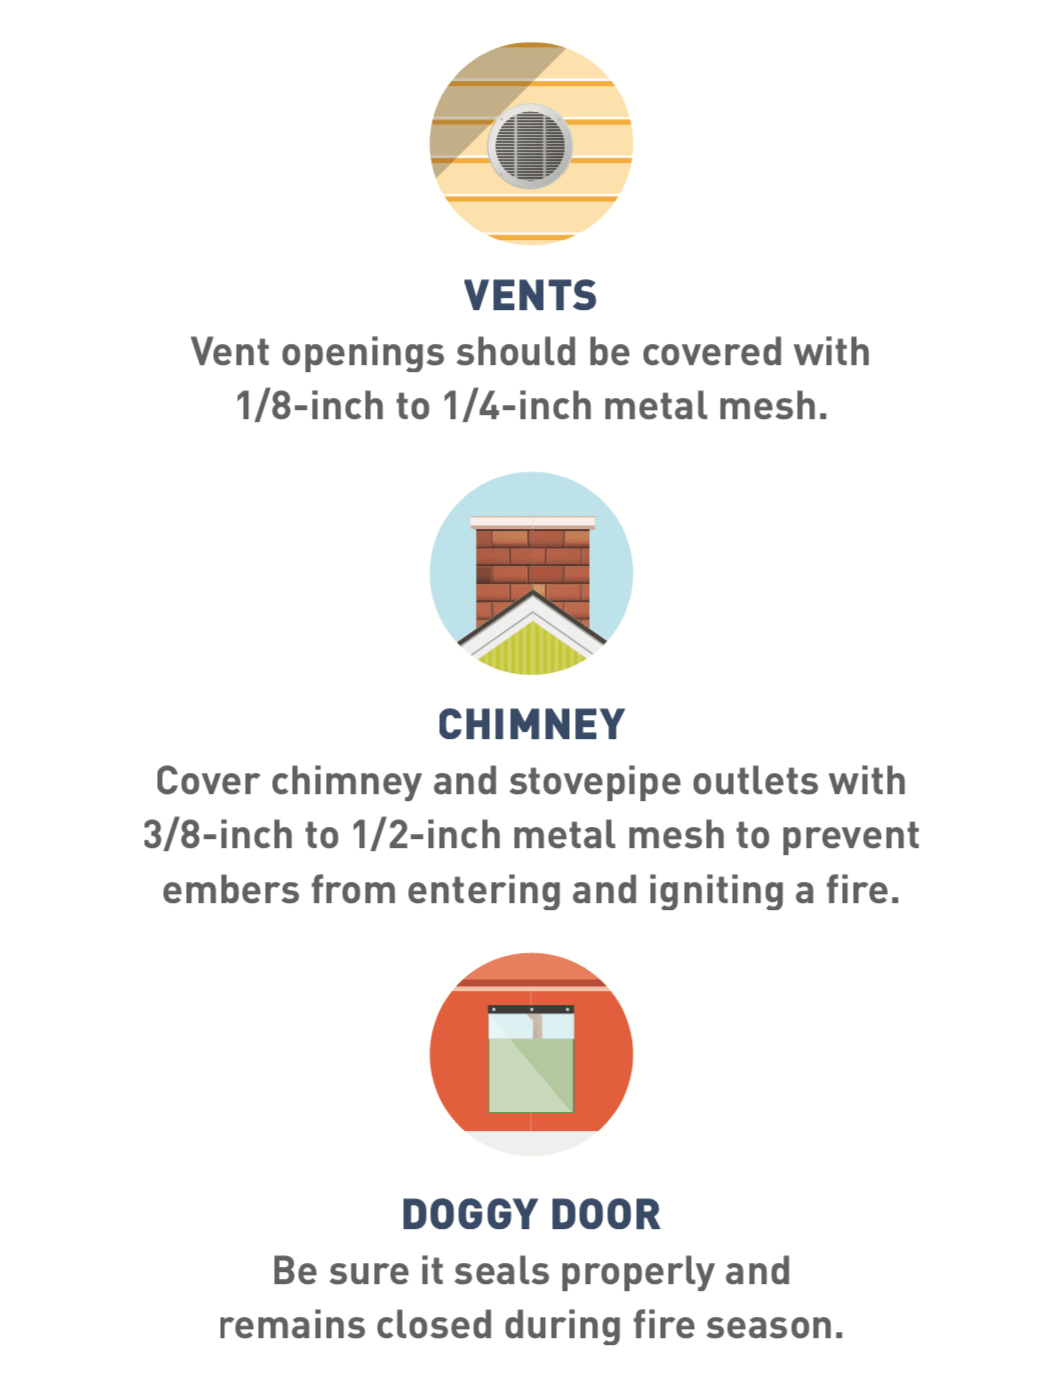 Vents—vent openings should be covered with 1/8-inch to 1/4-inch metal mesh.     Chimney—cover chimney and stovepipe outlets with ⅜-inch to ½-inch metal mesh to prevent embers from entering and igniting a fire.     Doggy door—be sure it seals properly and remains closed during fire season.